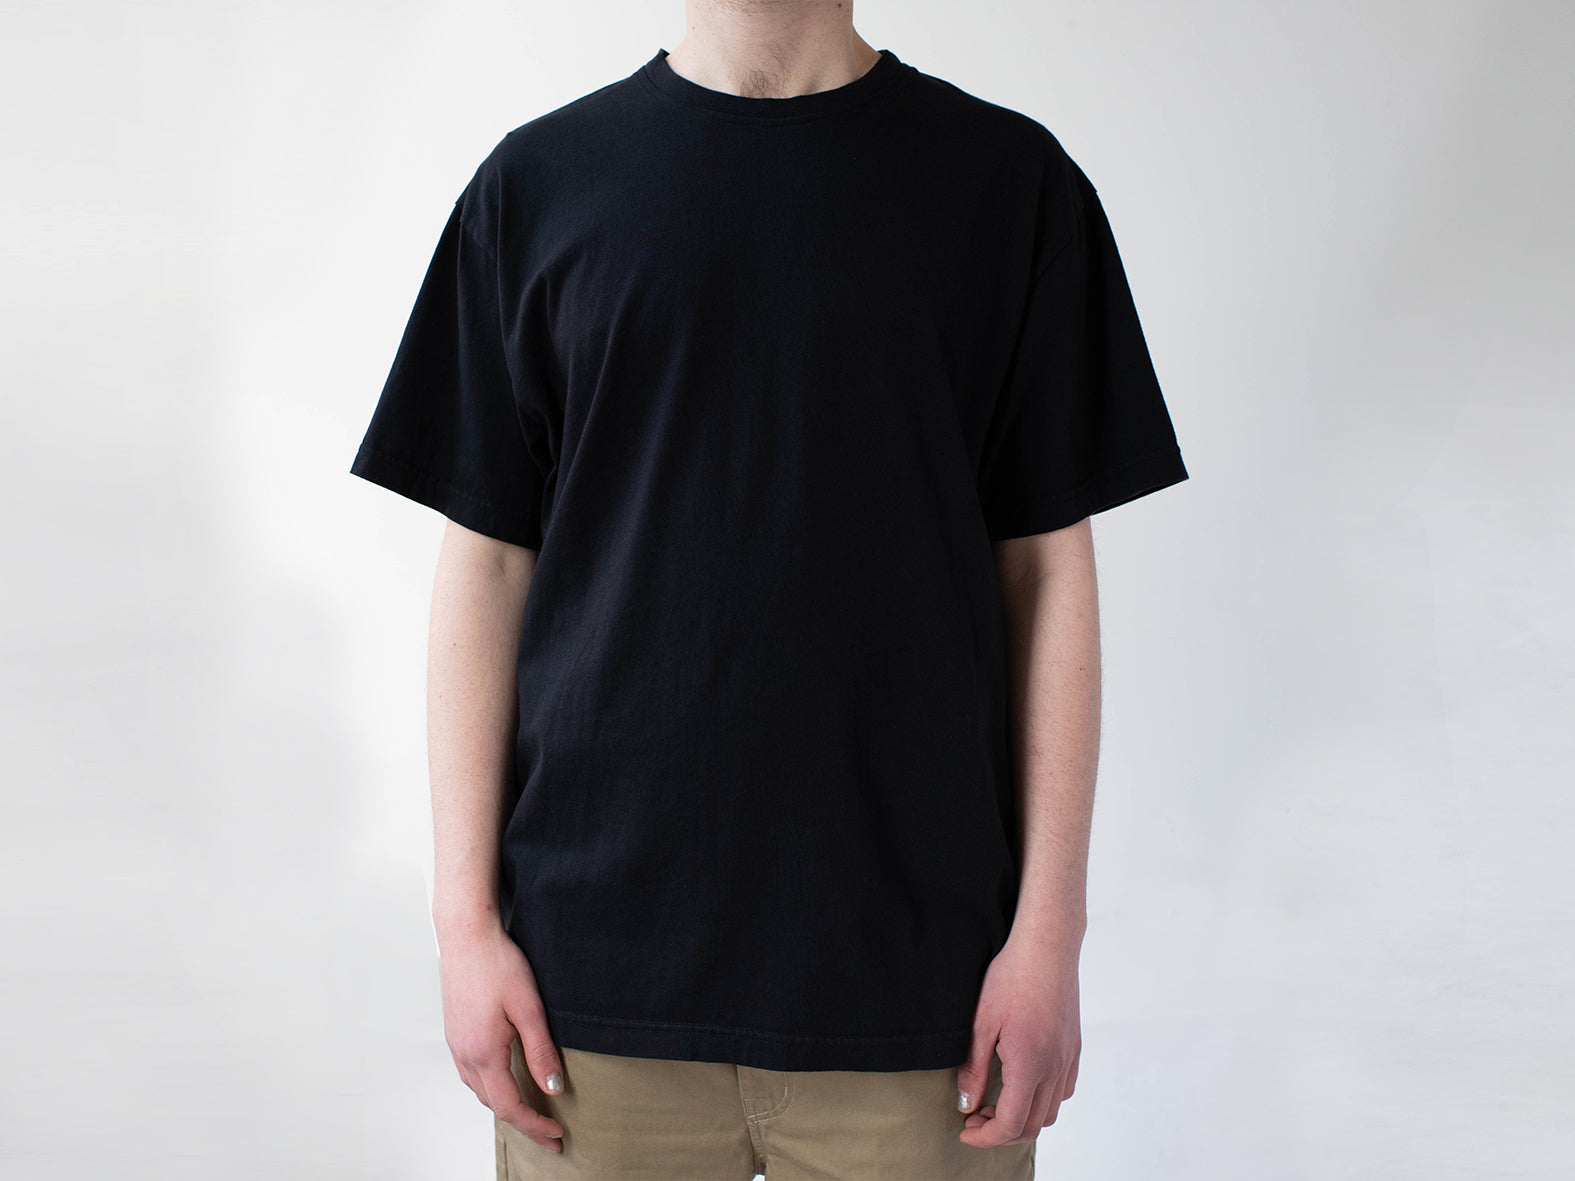 Nº A. OVERSIZE FIT TEE. BLACK.